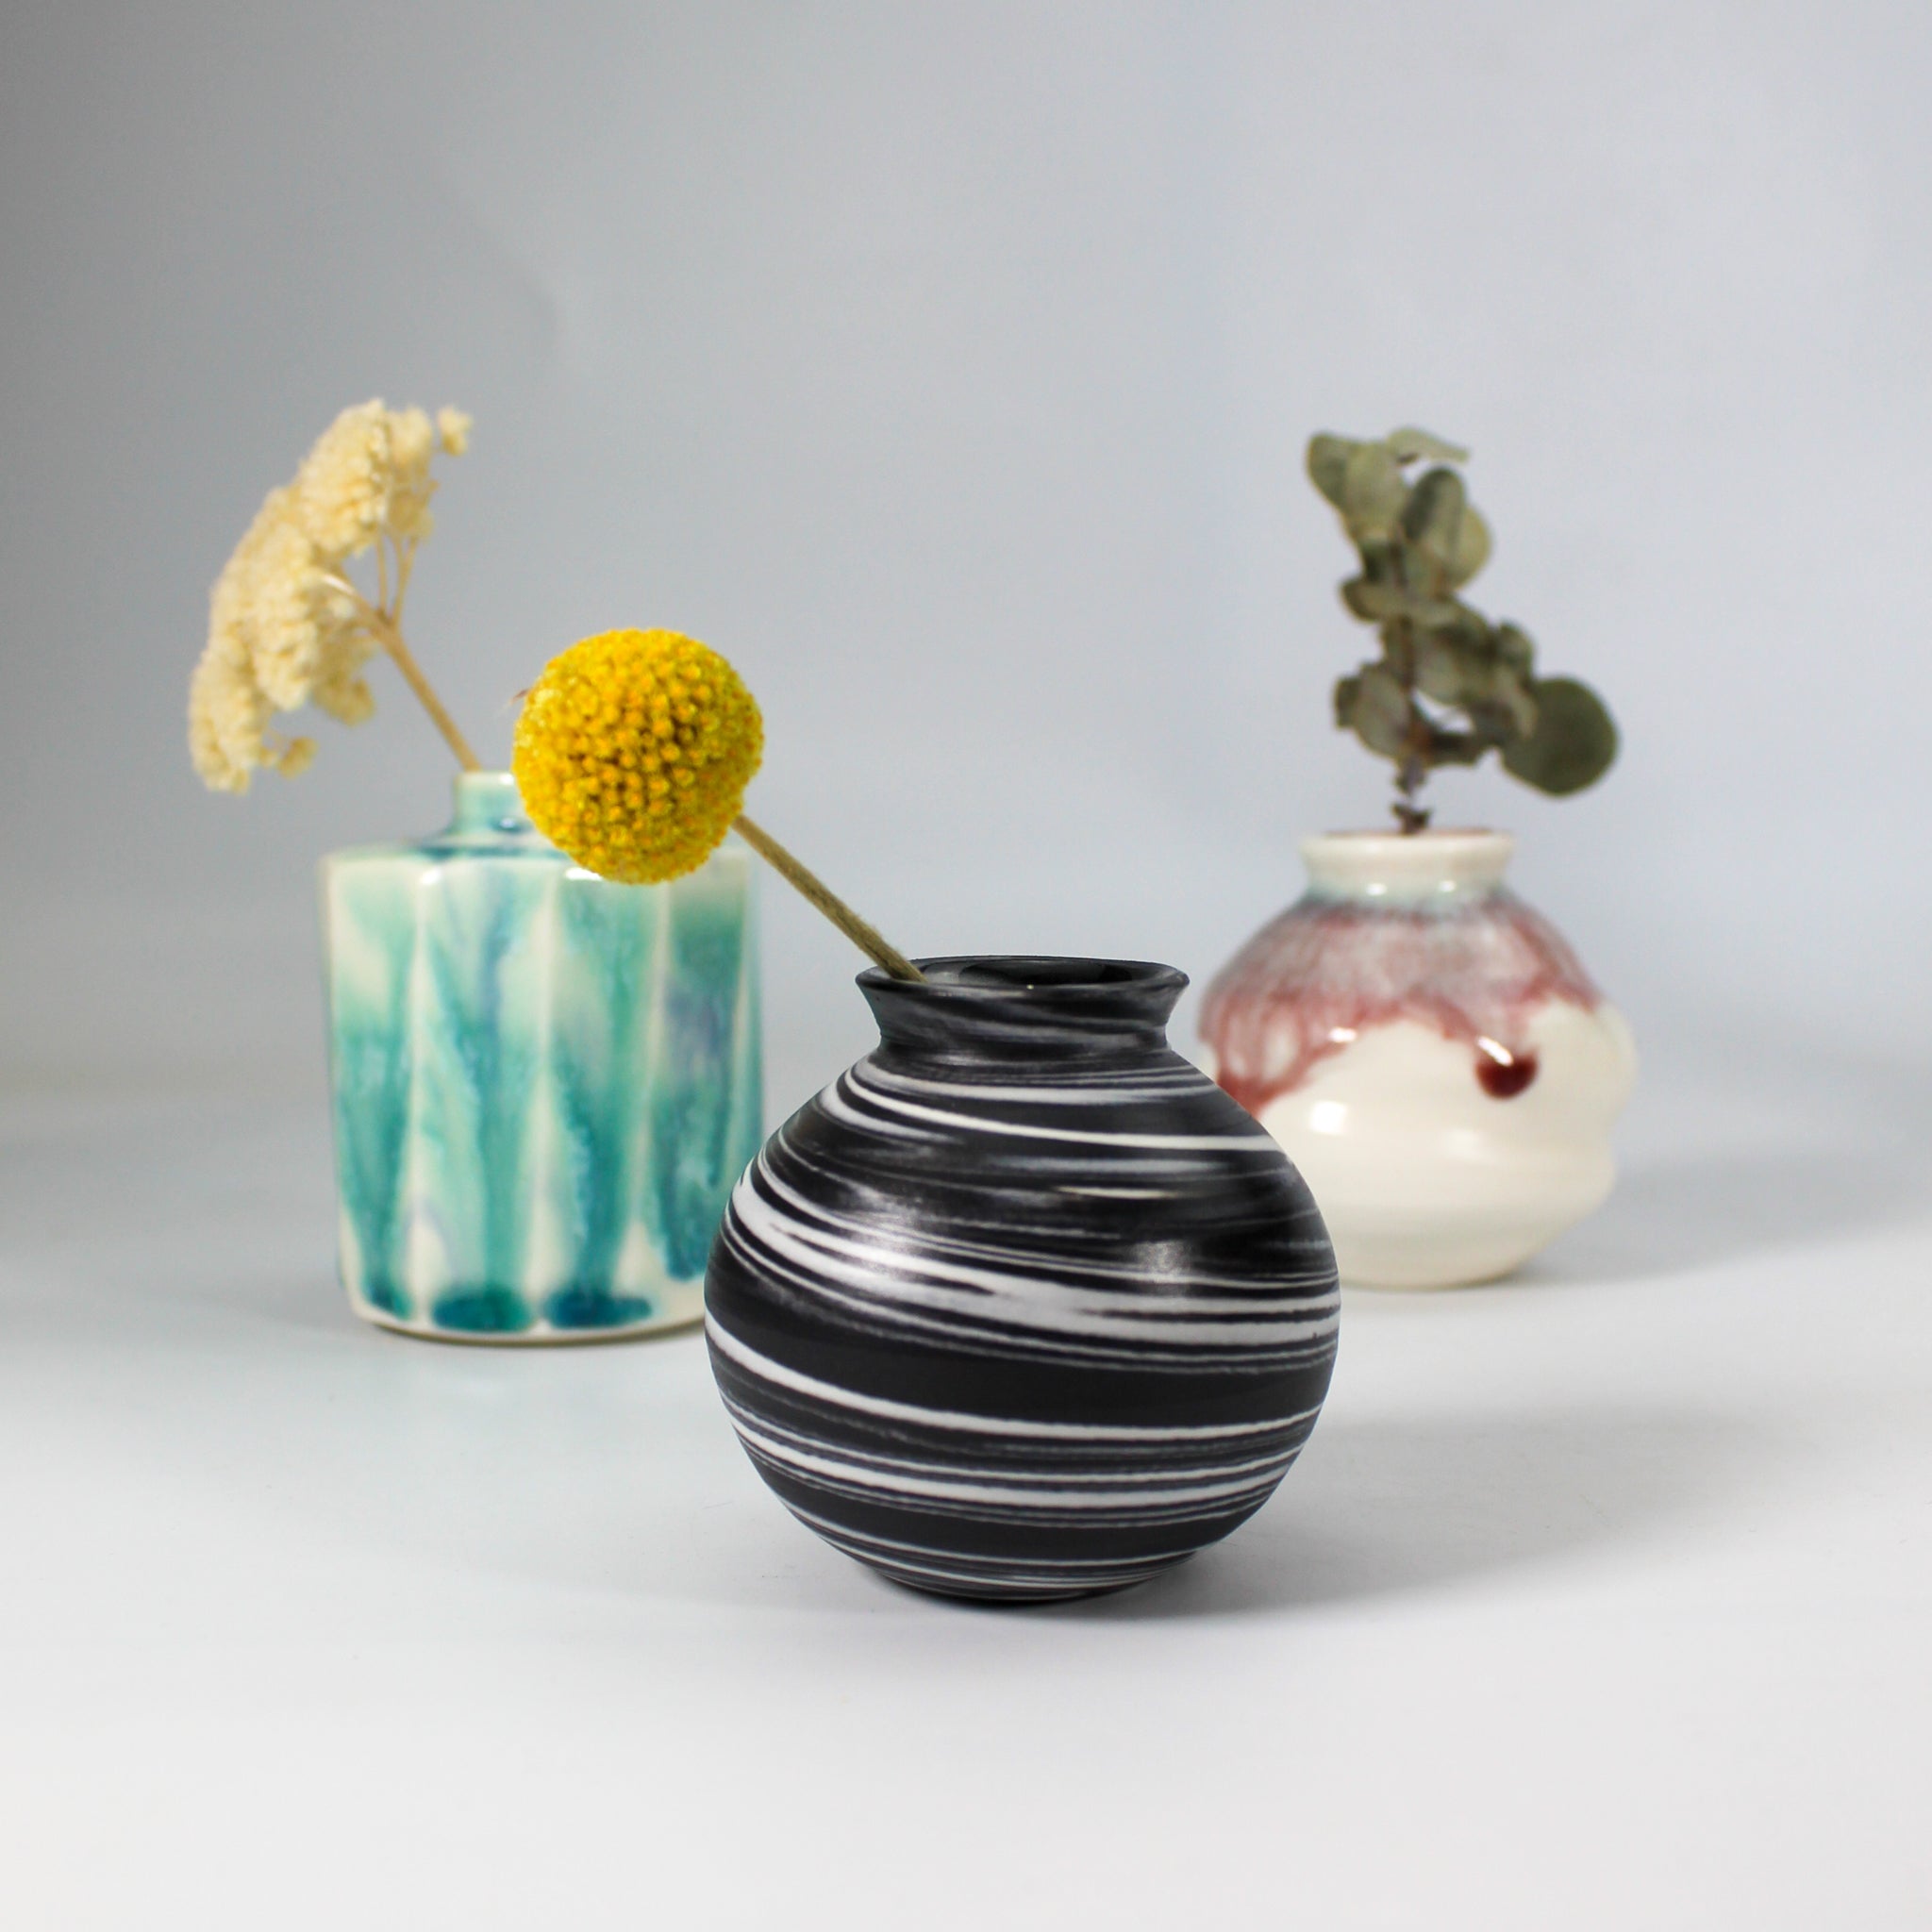 Selection of small handmade pottery vases with differing glazes